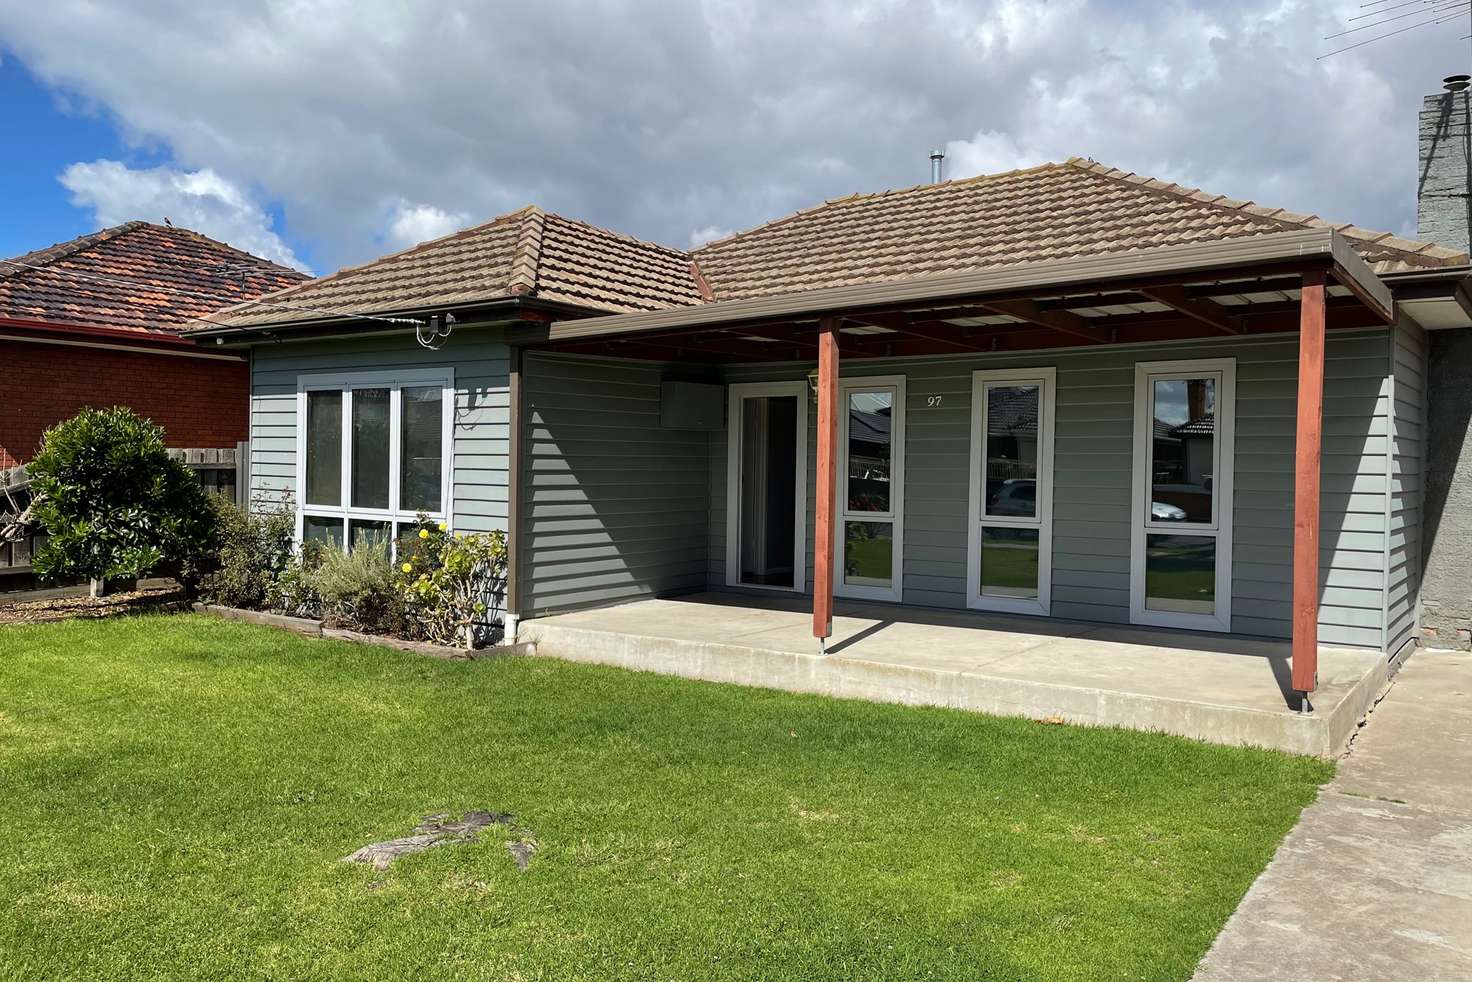 Main view of Homely house listing, 97 Second Avenue, Altona North VIC 3025